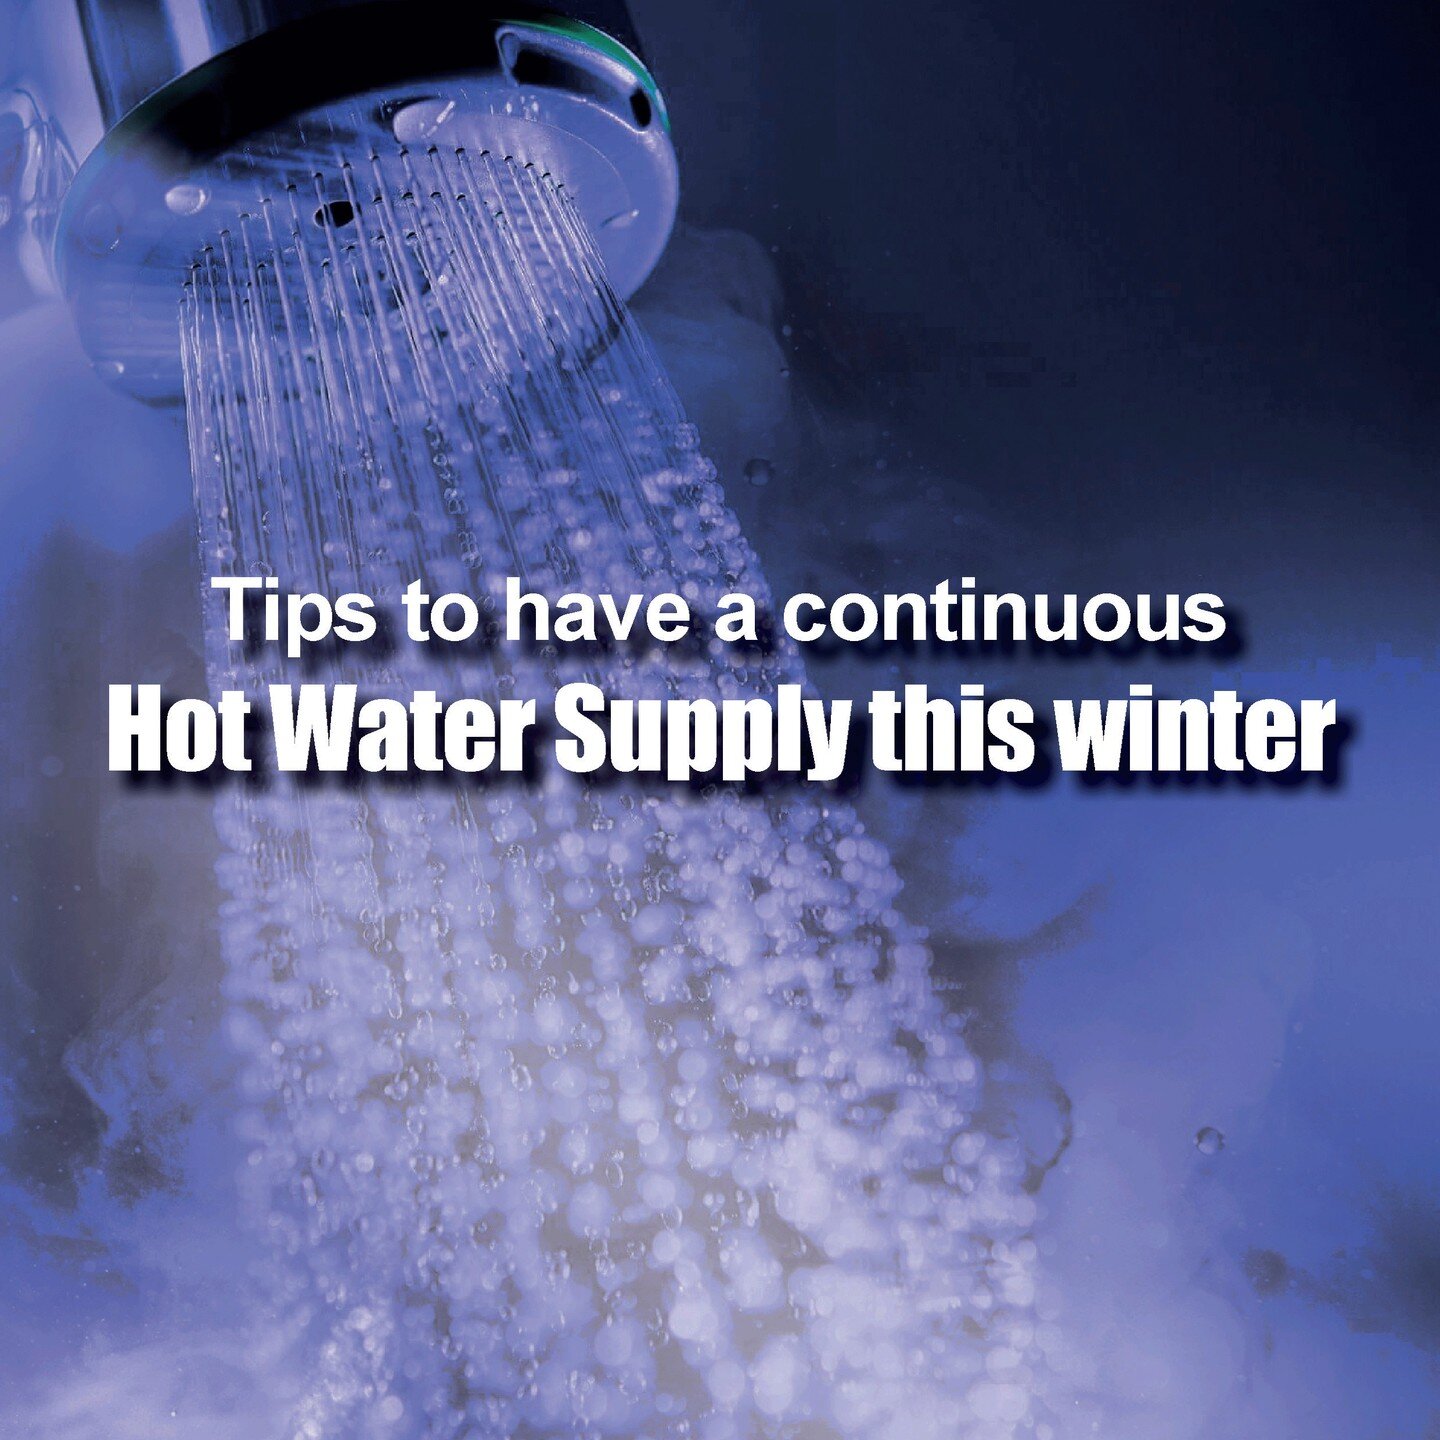 Make sure your hot water system is in its best shape. Look for any rust marks on the outside of the heater, leaks and other signs of metal corroding. 

If you see any leaks contact your local plumber to run a complete hot water tank inspection.😊
-
#